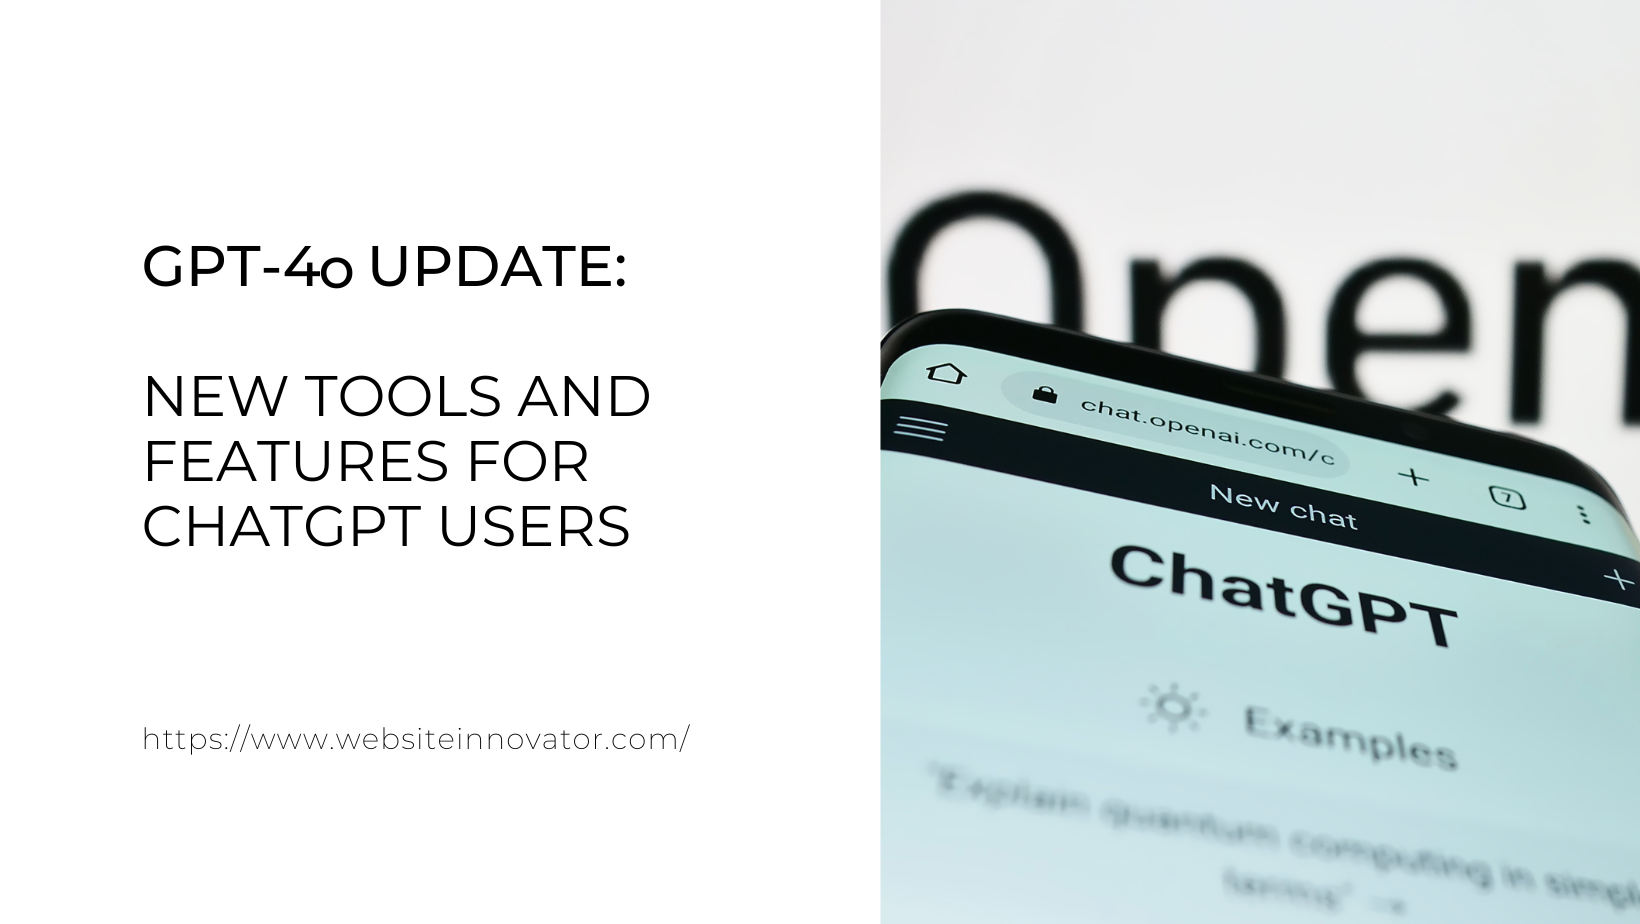 GPT-4o Update: New Tools and Features for ChatGPT Users